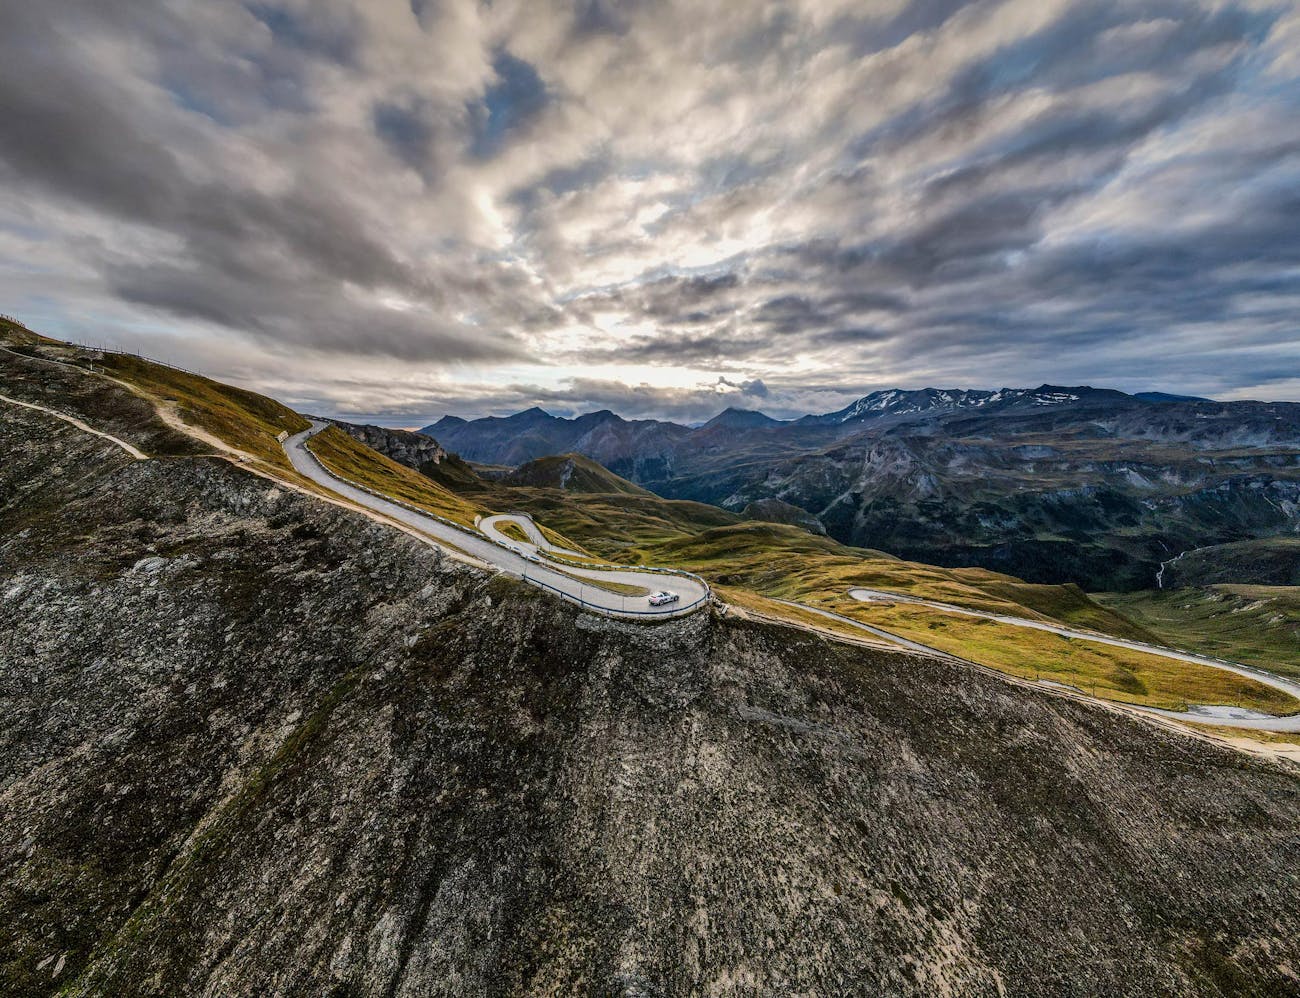 Panoramic view of mountain roads and Alps under grey skies